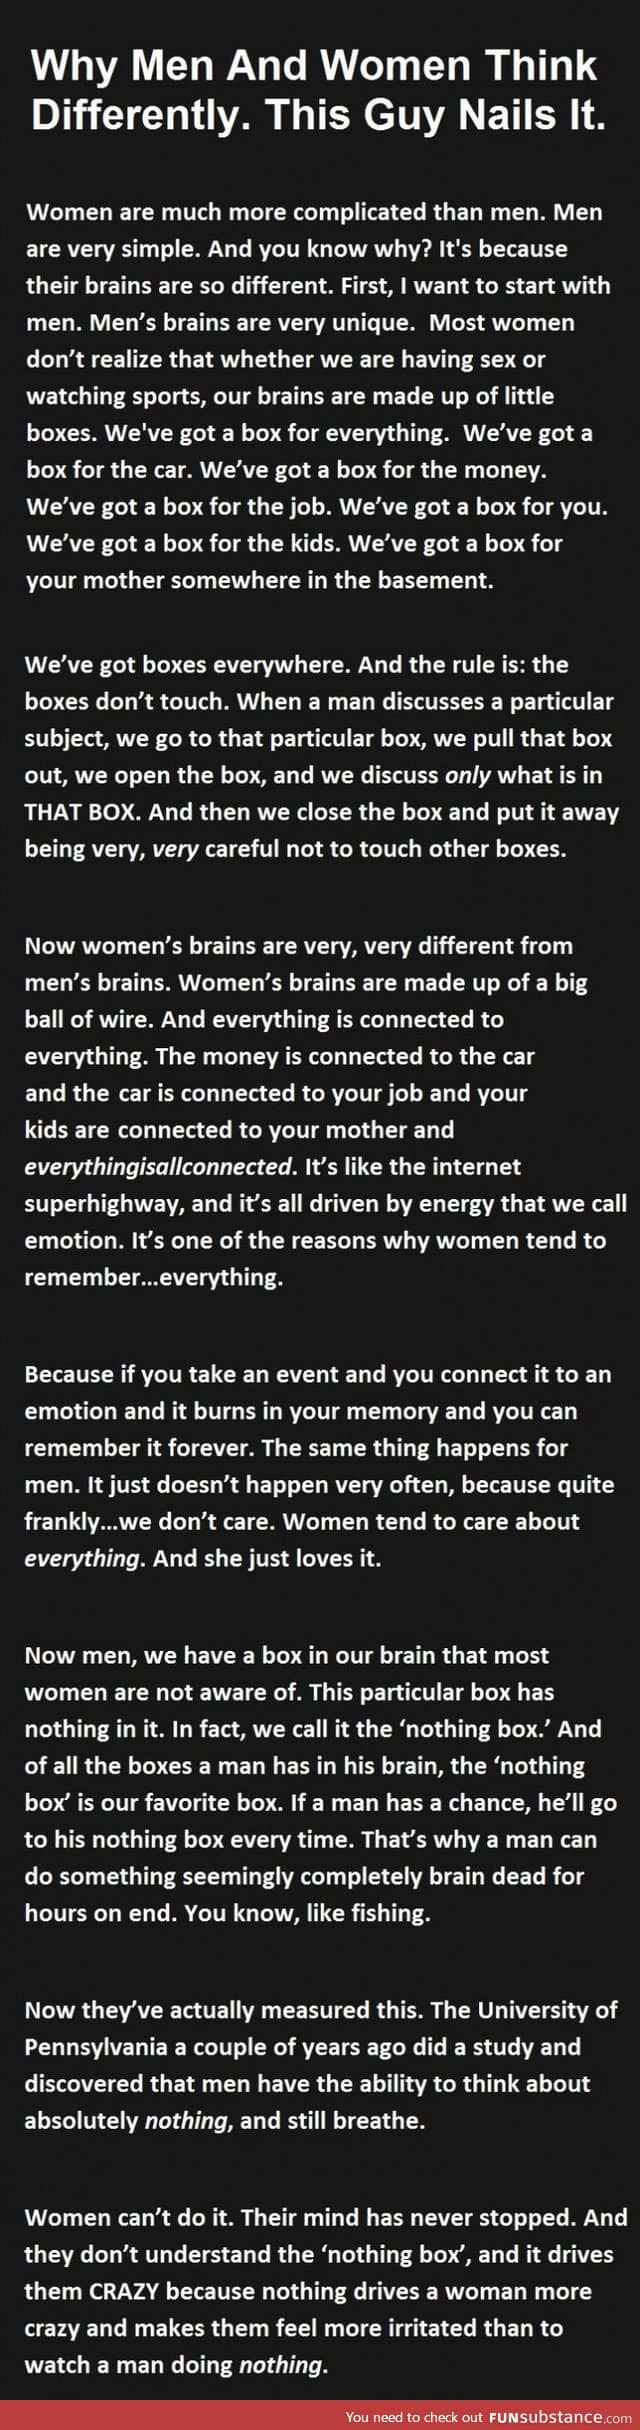 Why men and women think differently